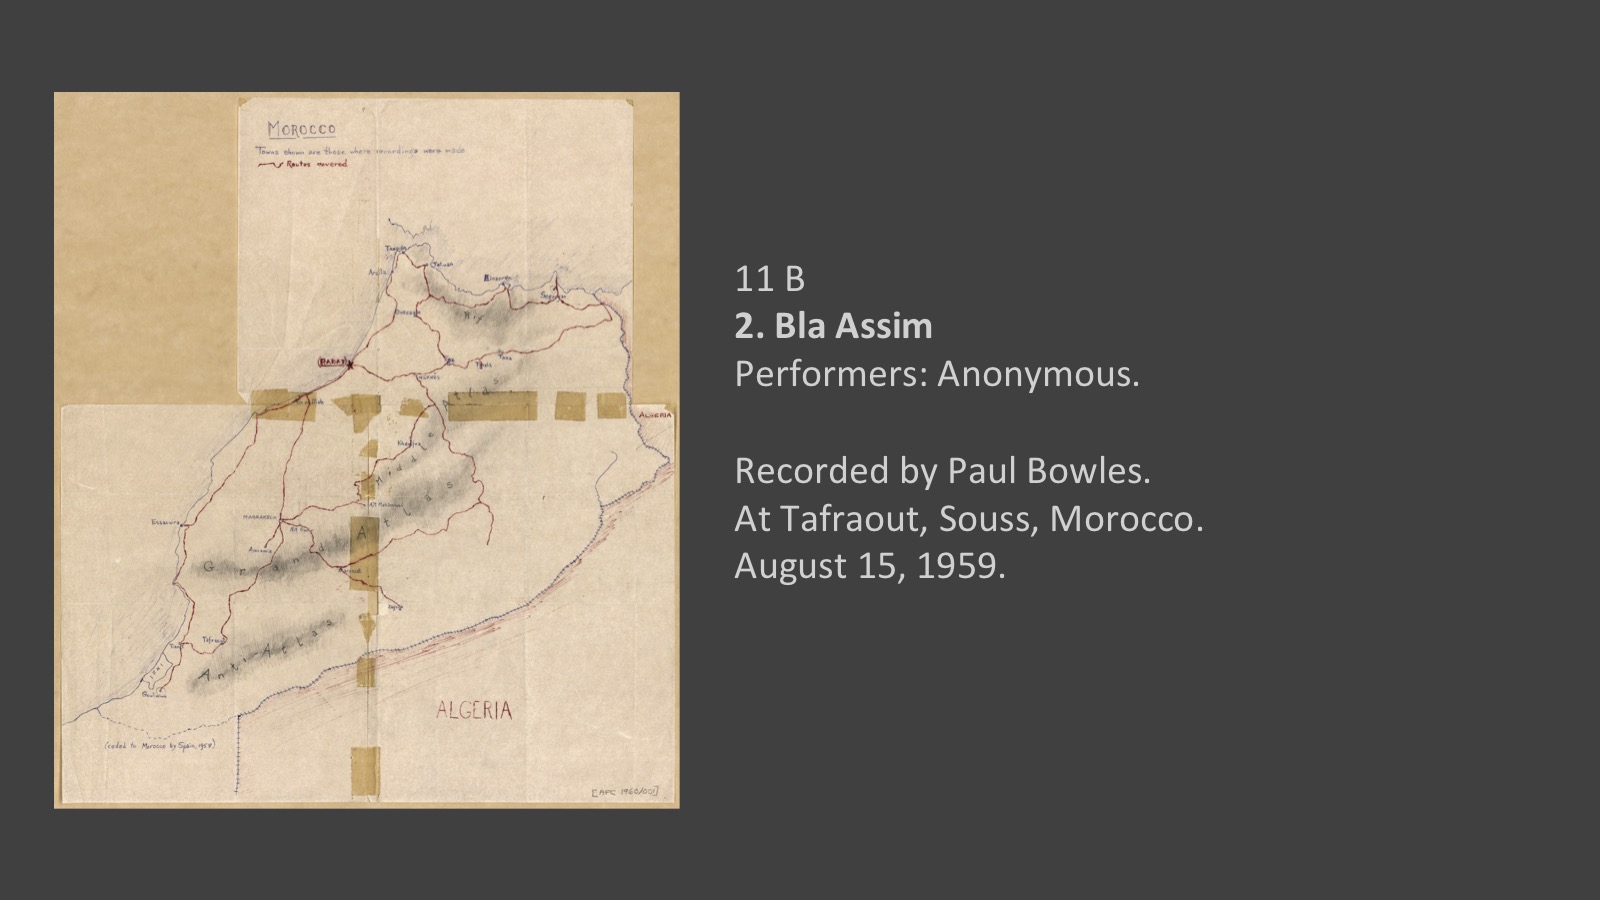 11B, Track 2
2. Bla Assim (untitled) 
Performers: Anonymous

Recorded by Paul Bowles.
At Tafraout, Souss, Morocco.
August 15,1959.
